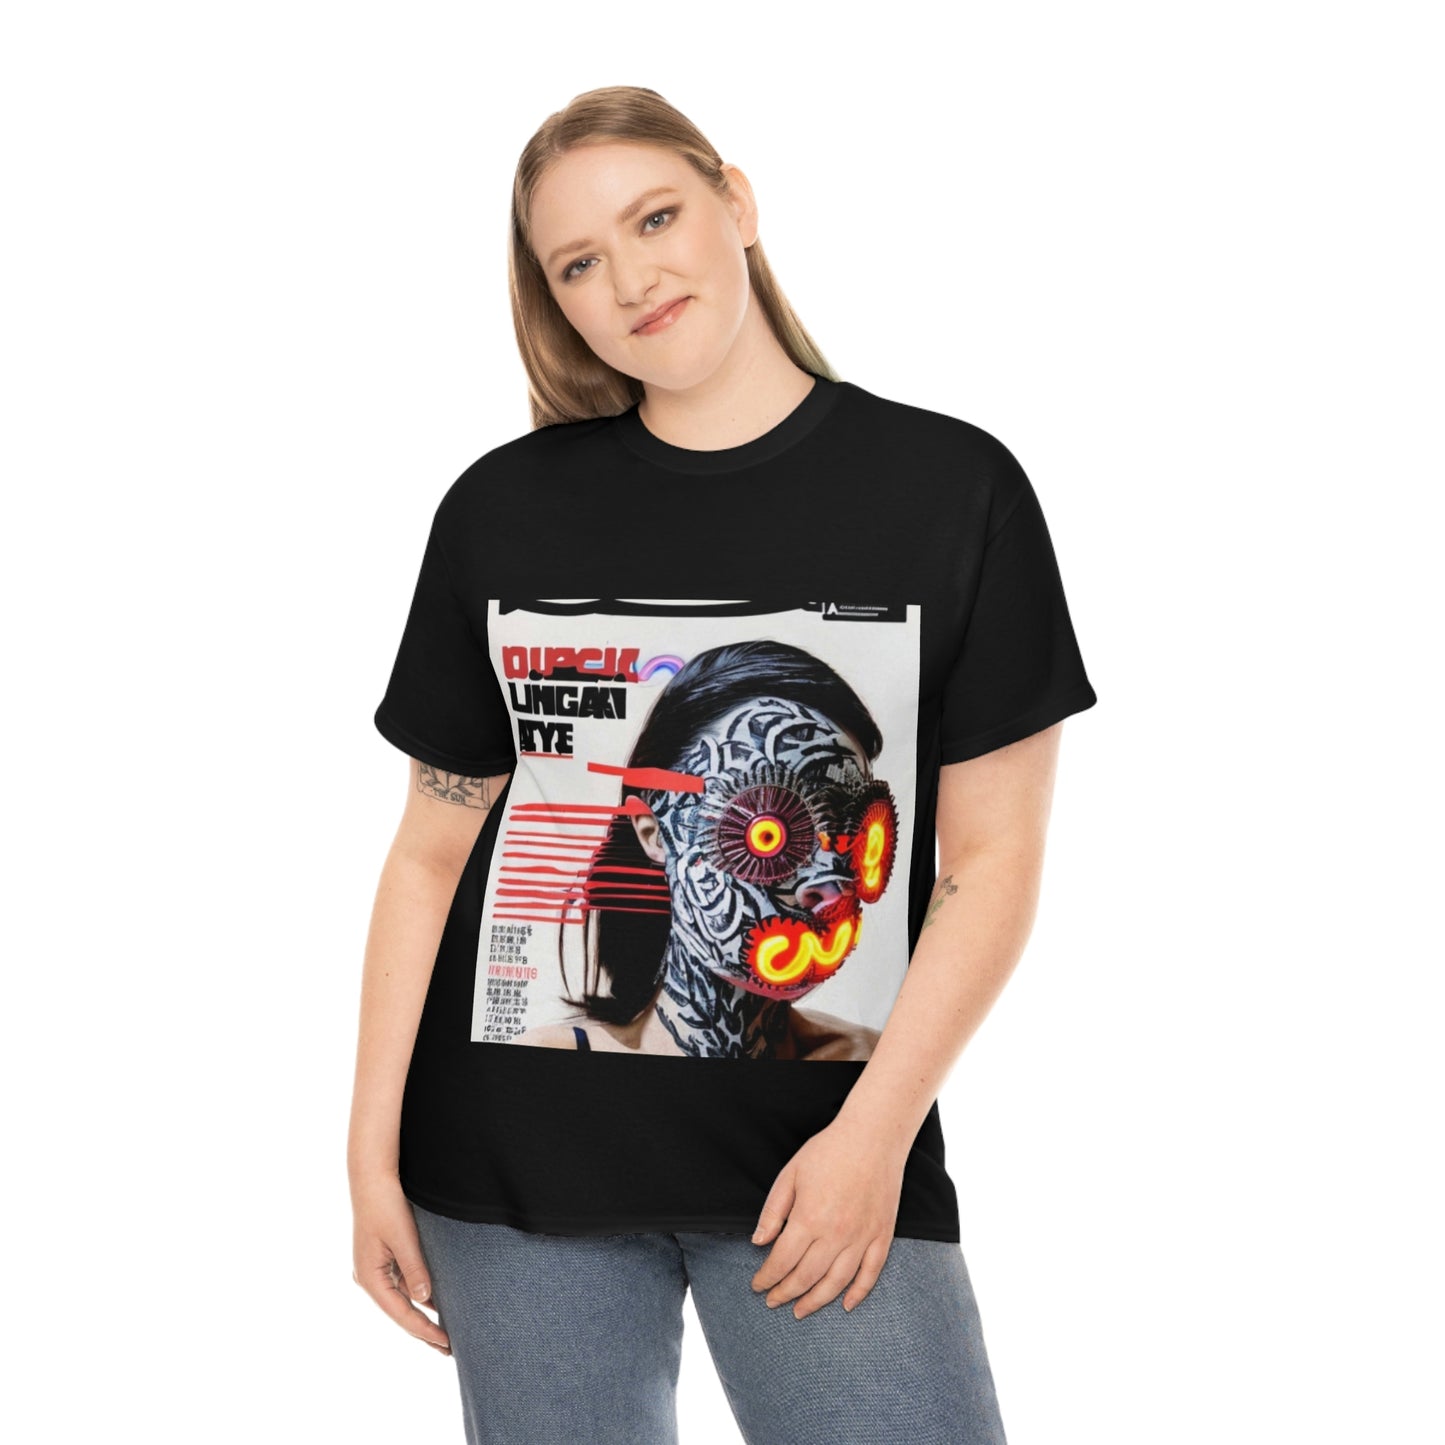 Lived Through - Indigenous Dystopian Warrior  T-Shirt Collection